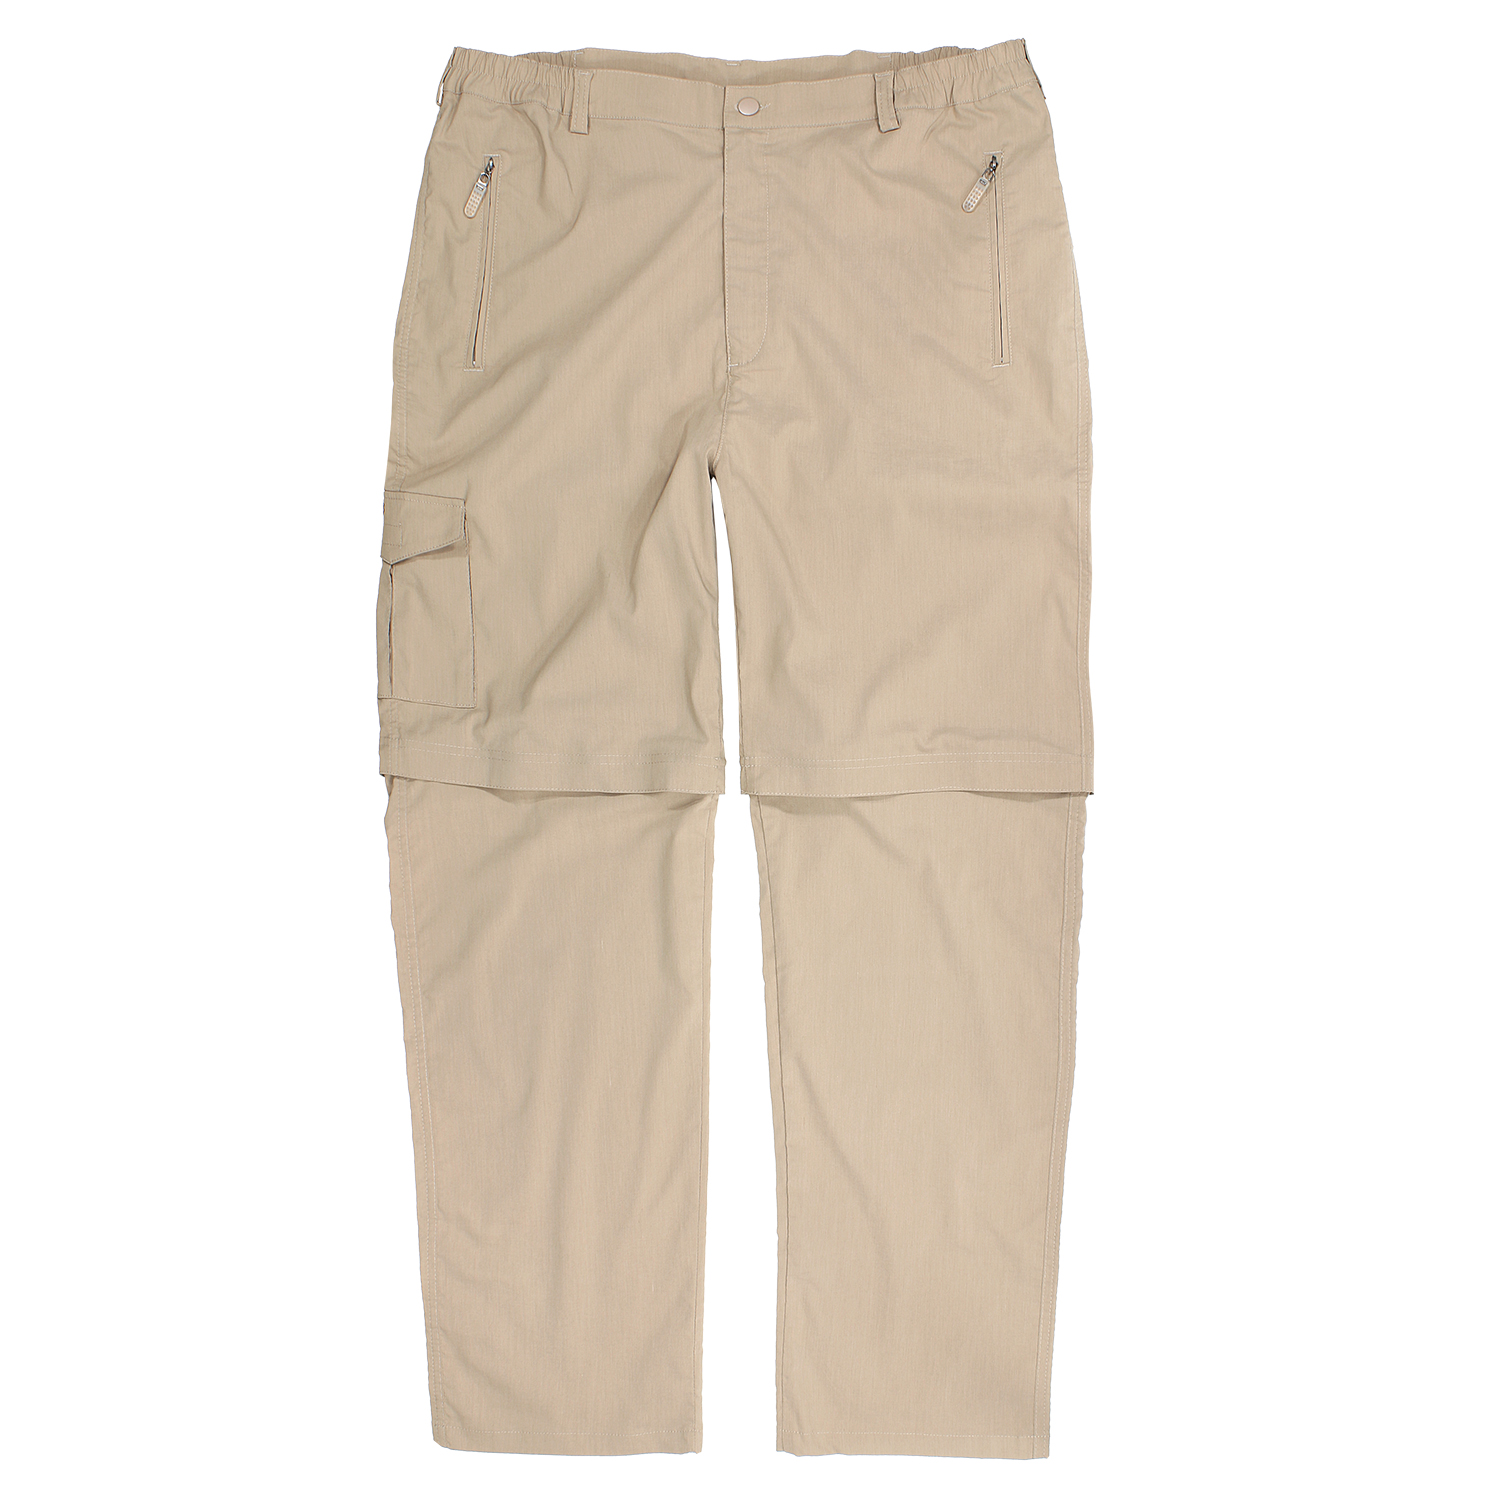 Abraxas outdoor-zip-off pants in sand up to oversize 10XL